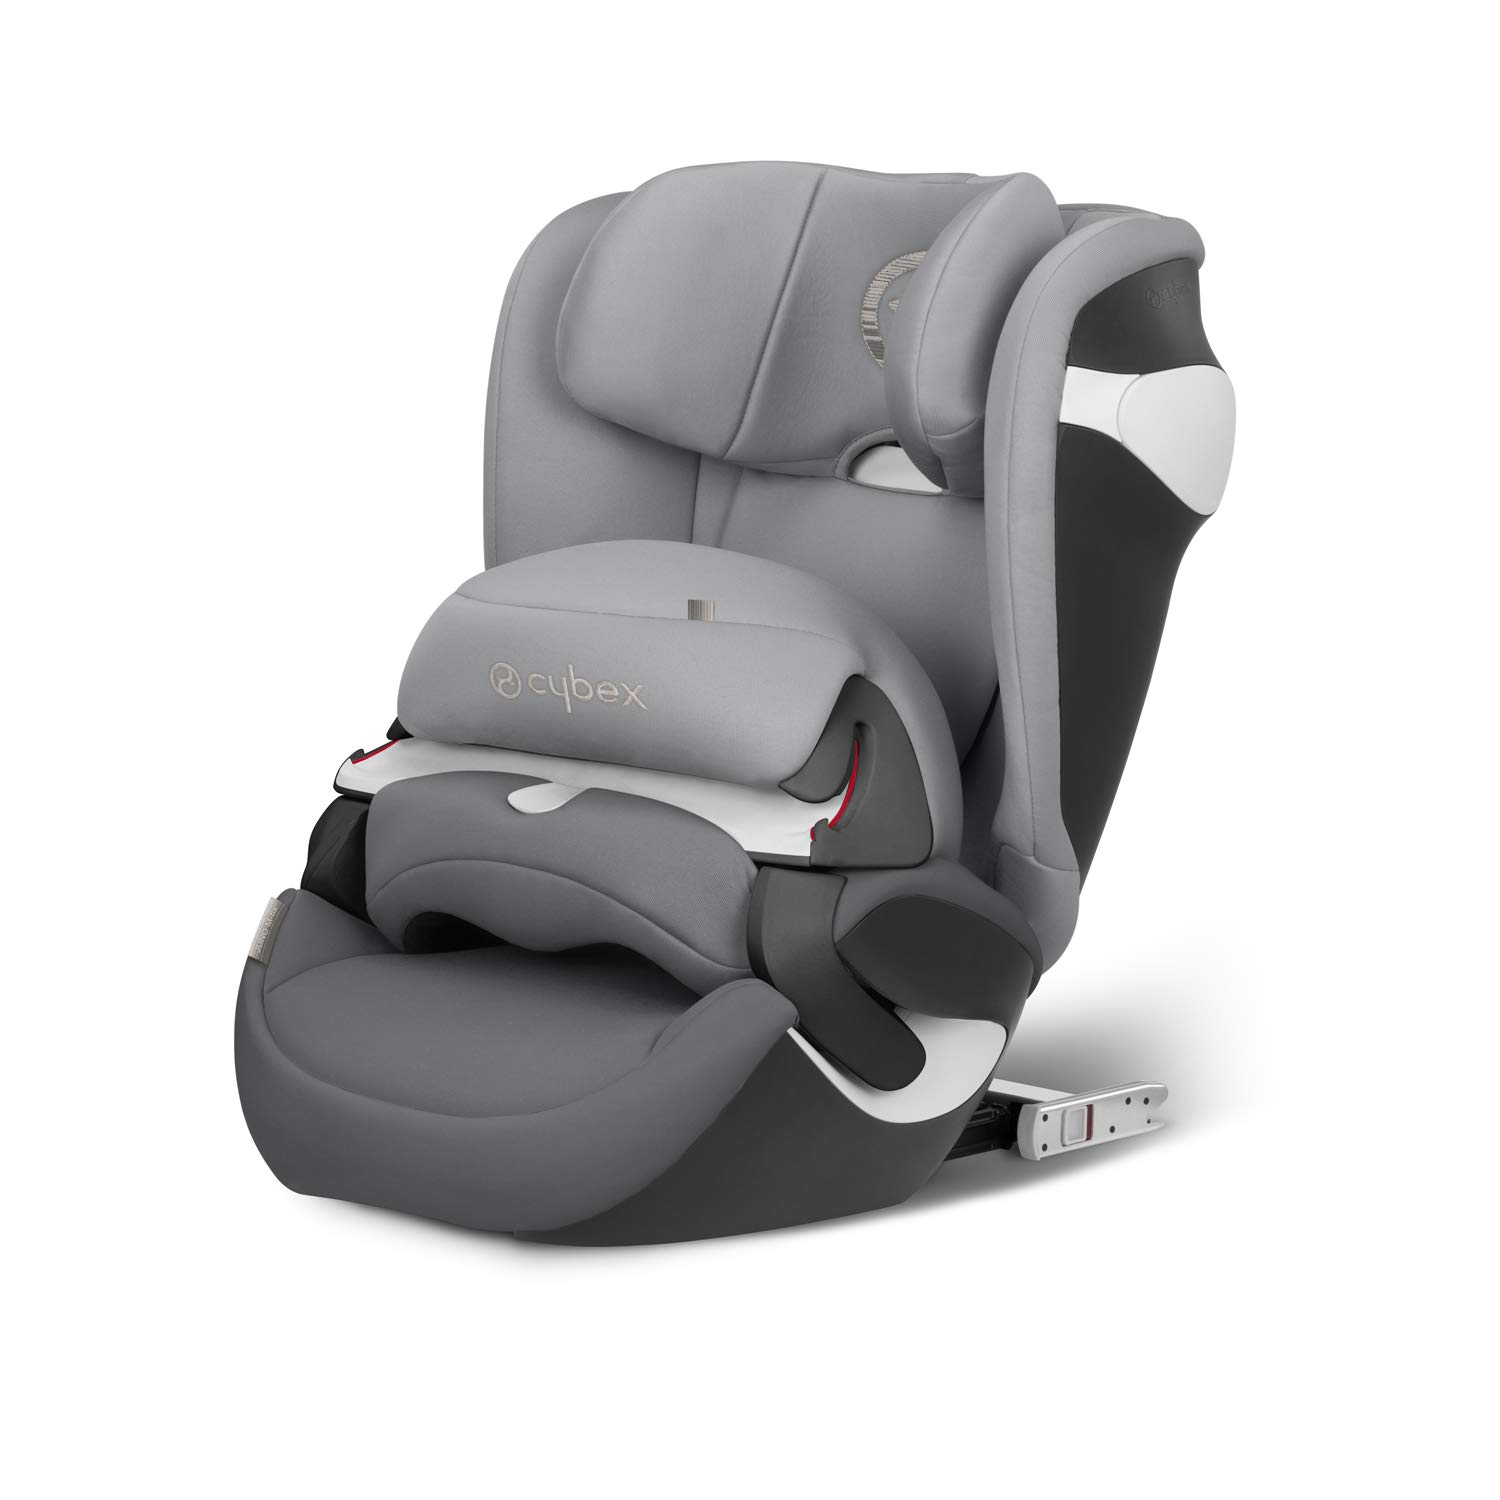 Cybex Gold Cybex Gold Juno M-fix Car Seat Group 1 (9-18 kg) with Isofix 2018 Collection Colour collection 2018